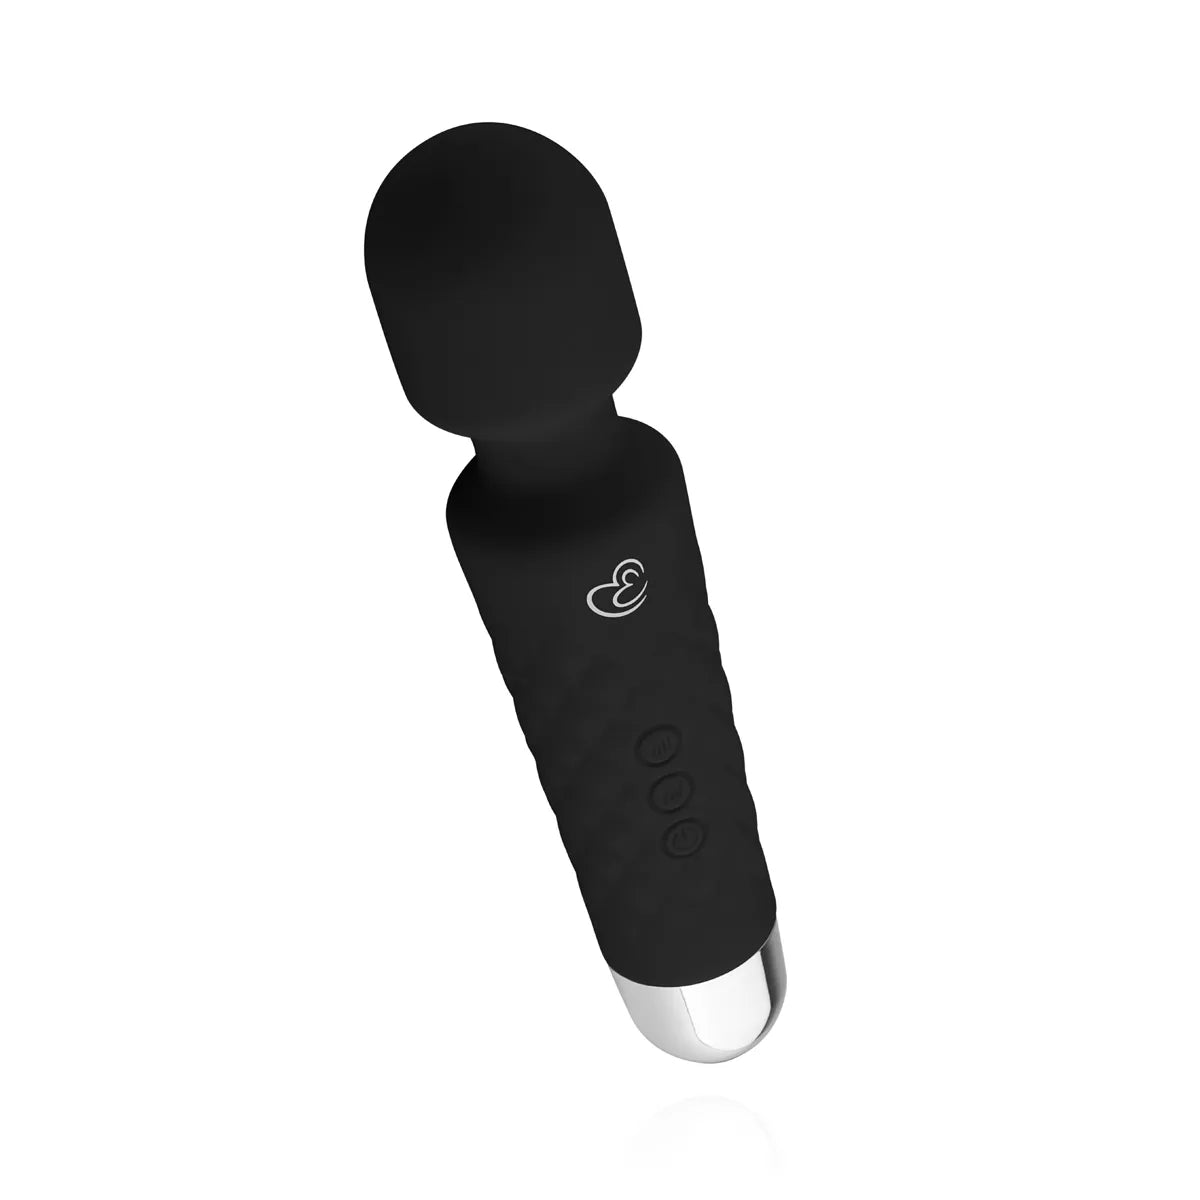 EasyToys Rechargeable Black Wand